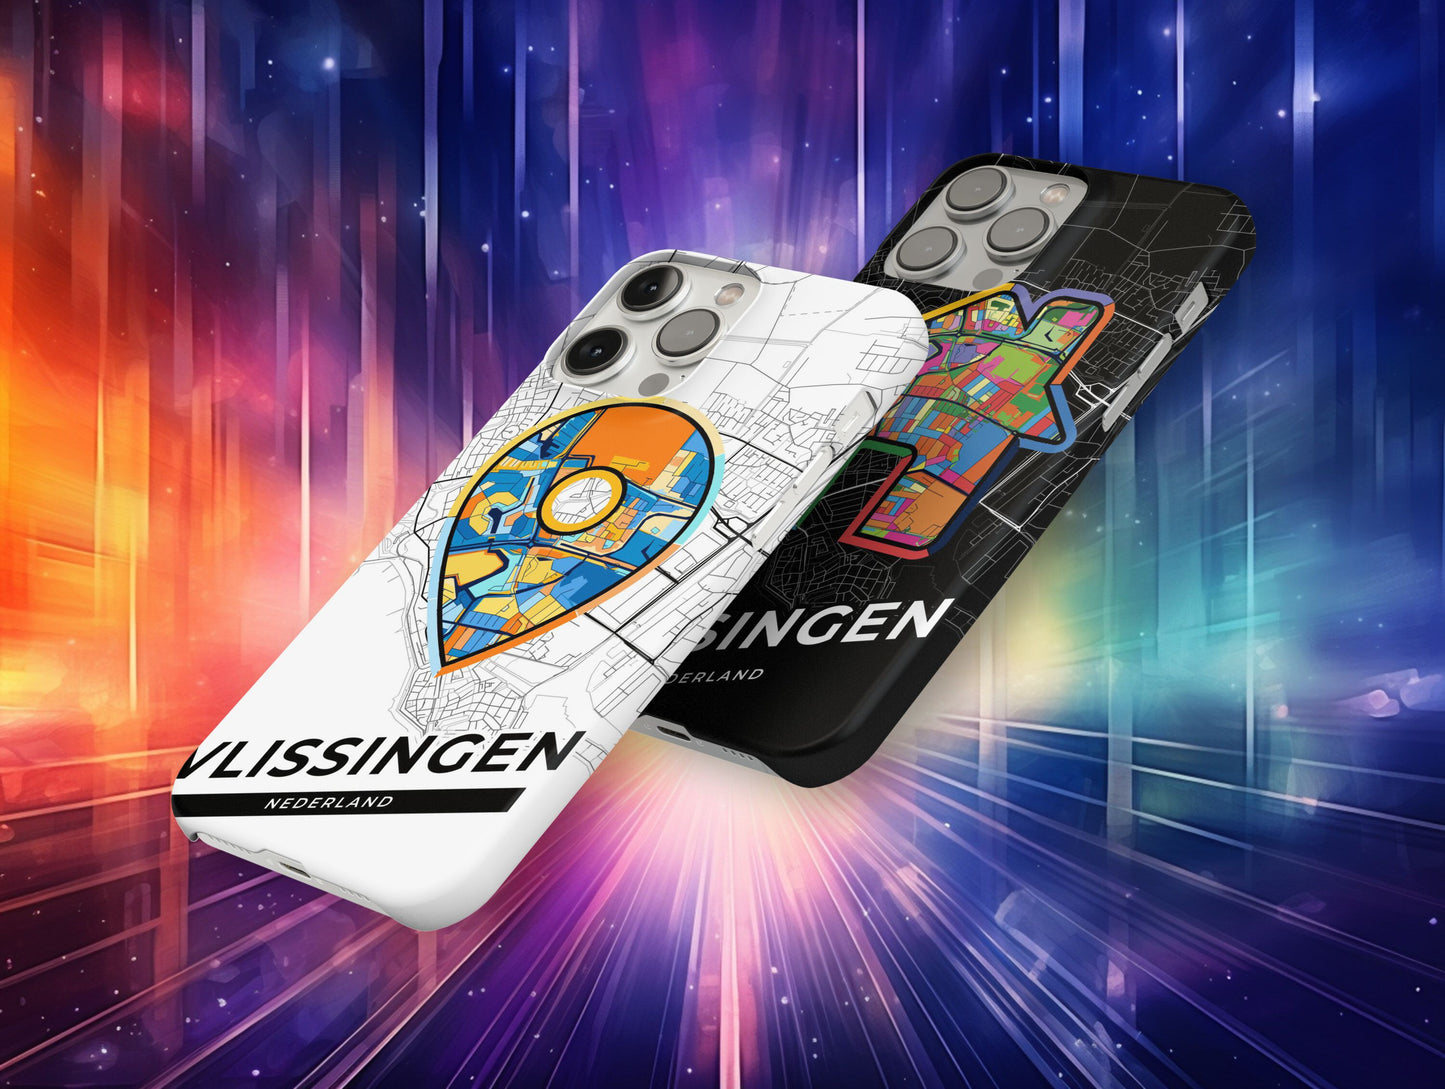 Vlissingen Netherlands slim phone case with colorful icon